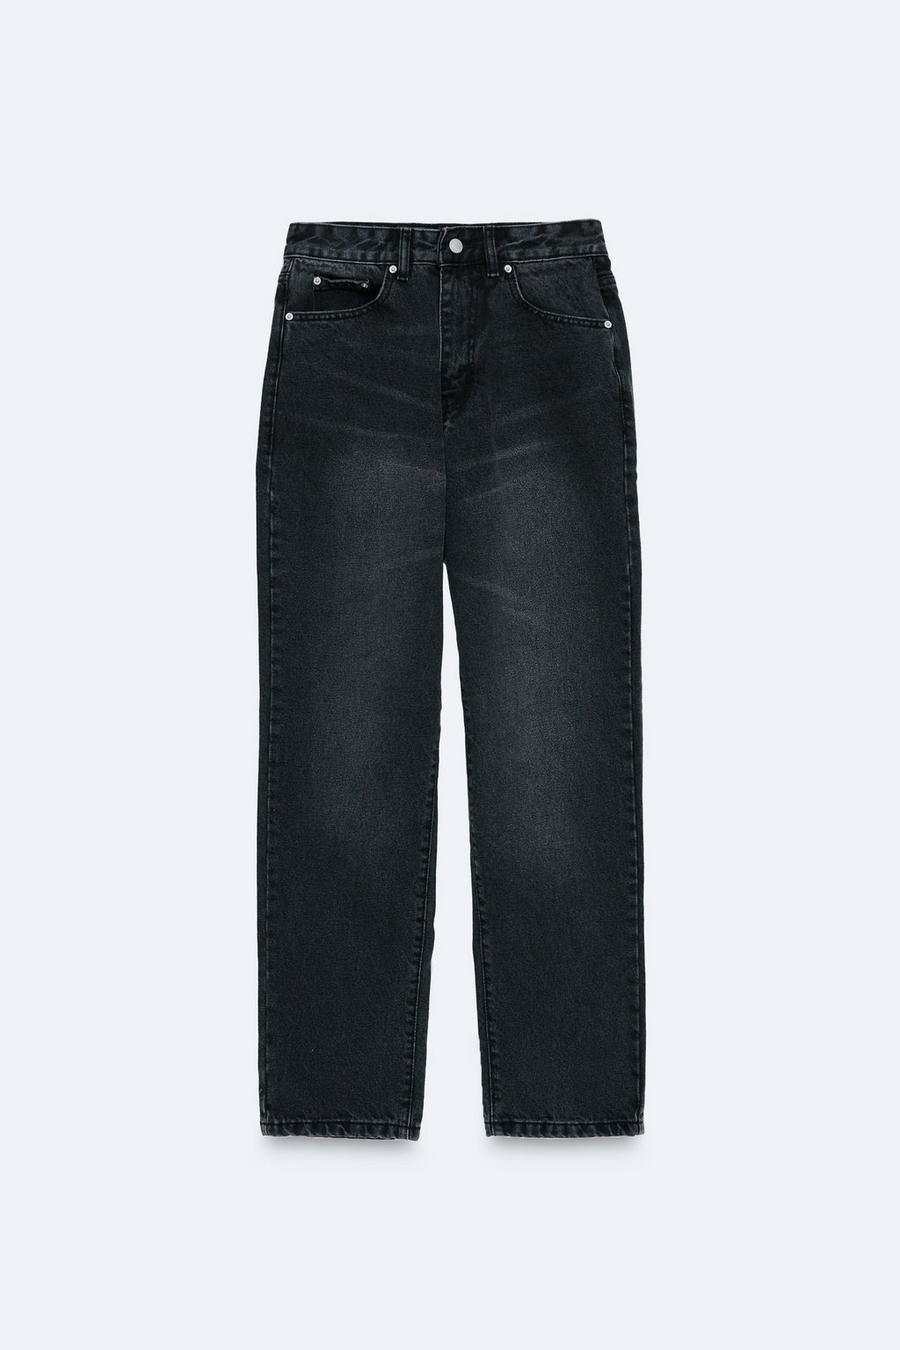 Knit Black Mill Dyed Girls Jeans 32/40, 28/32, Age Group: 8to13+ Years at  Rs 370/piece in Delhi